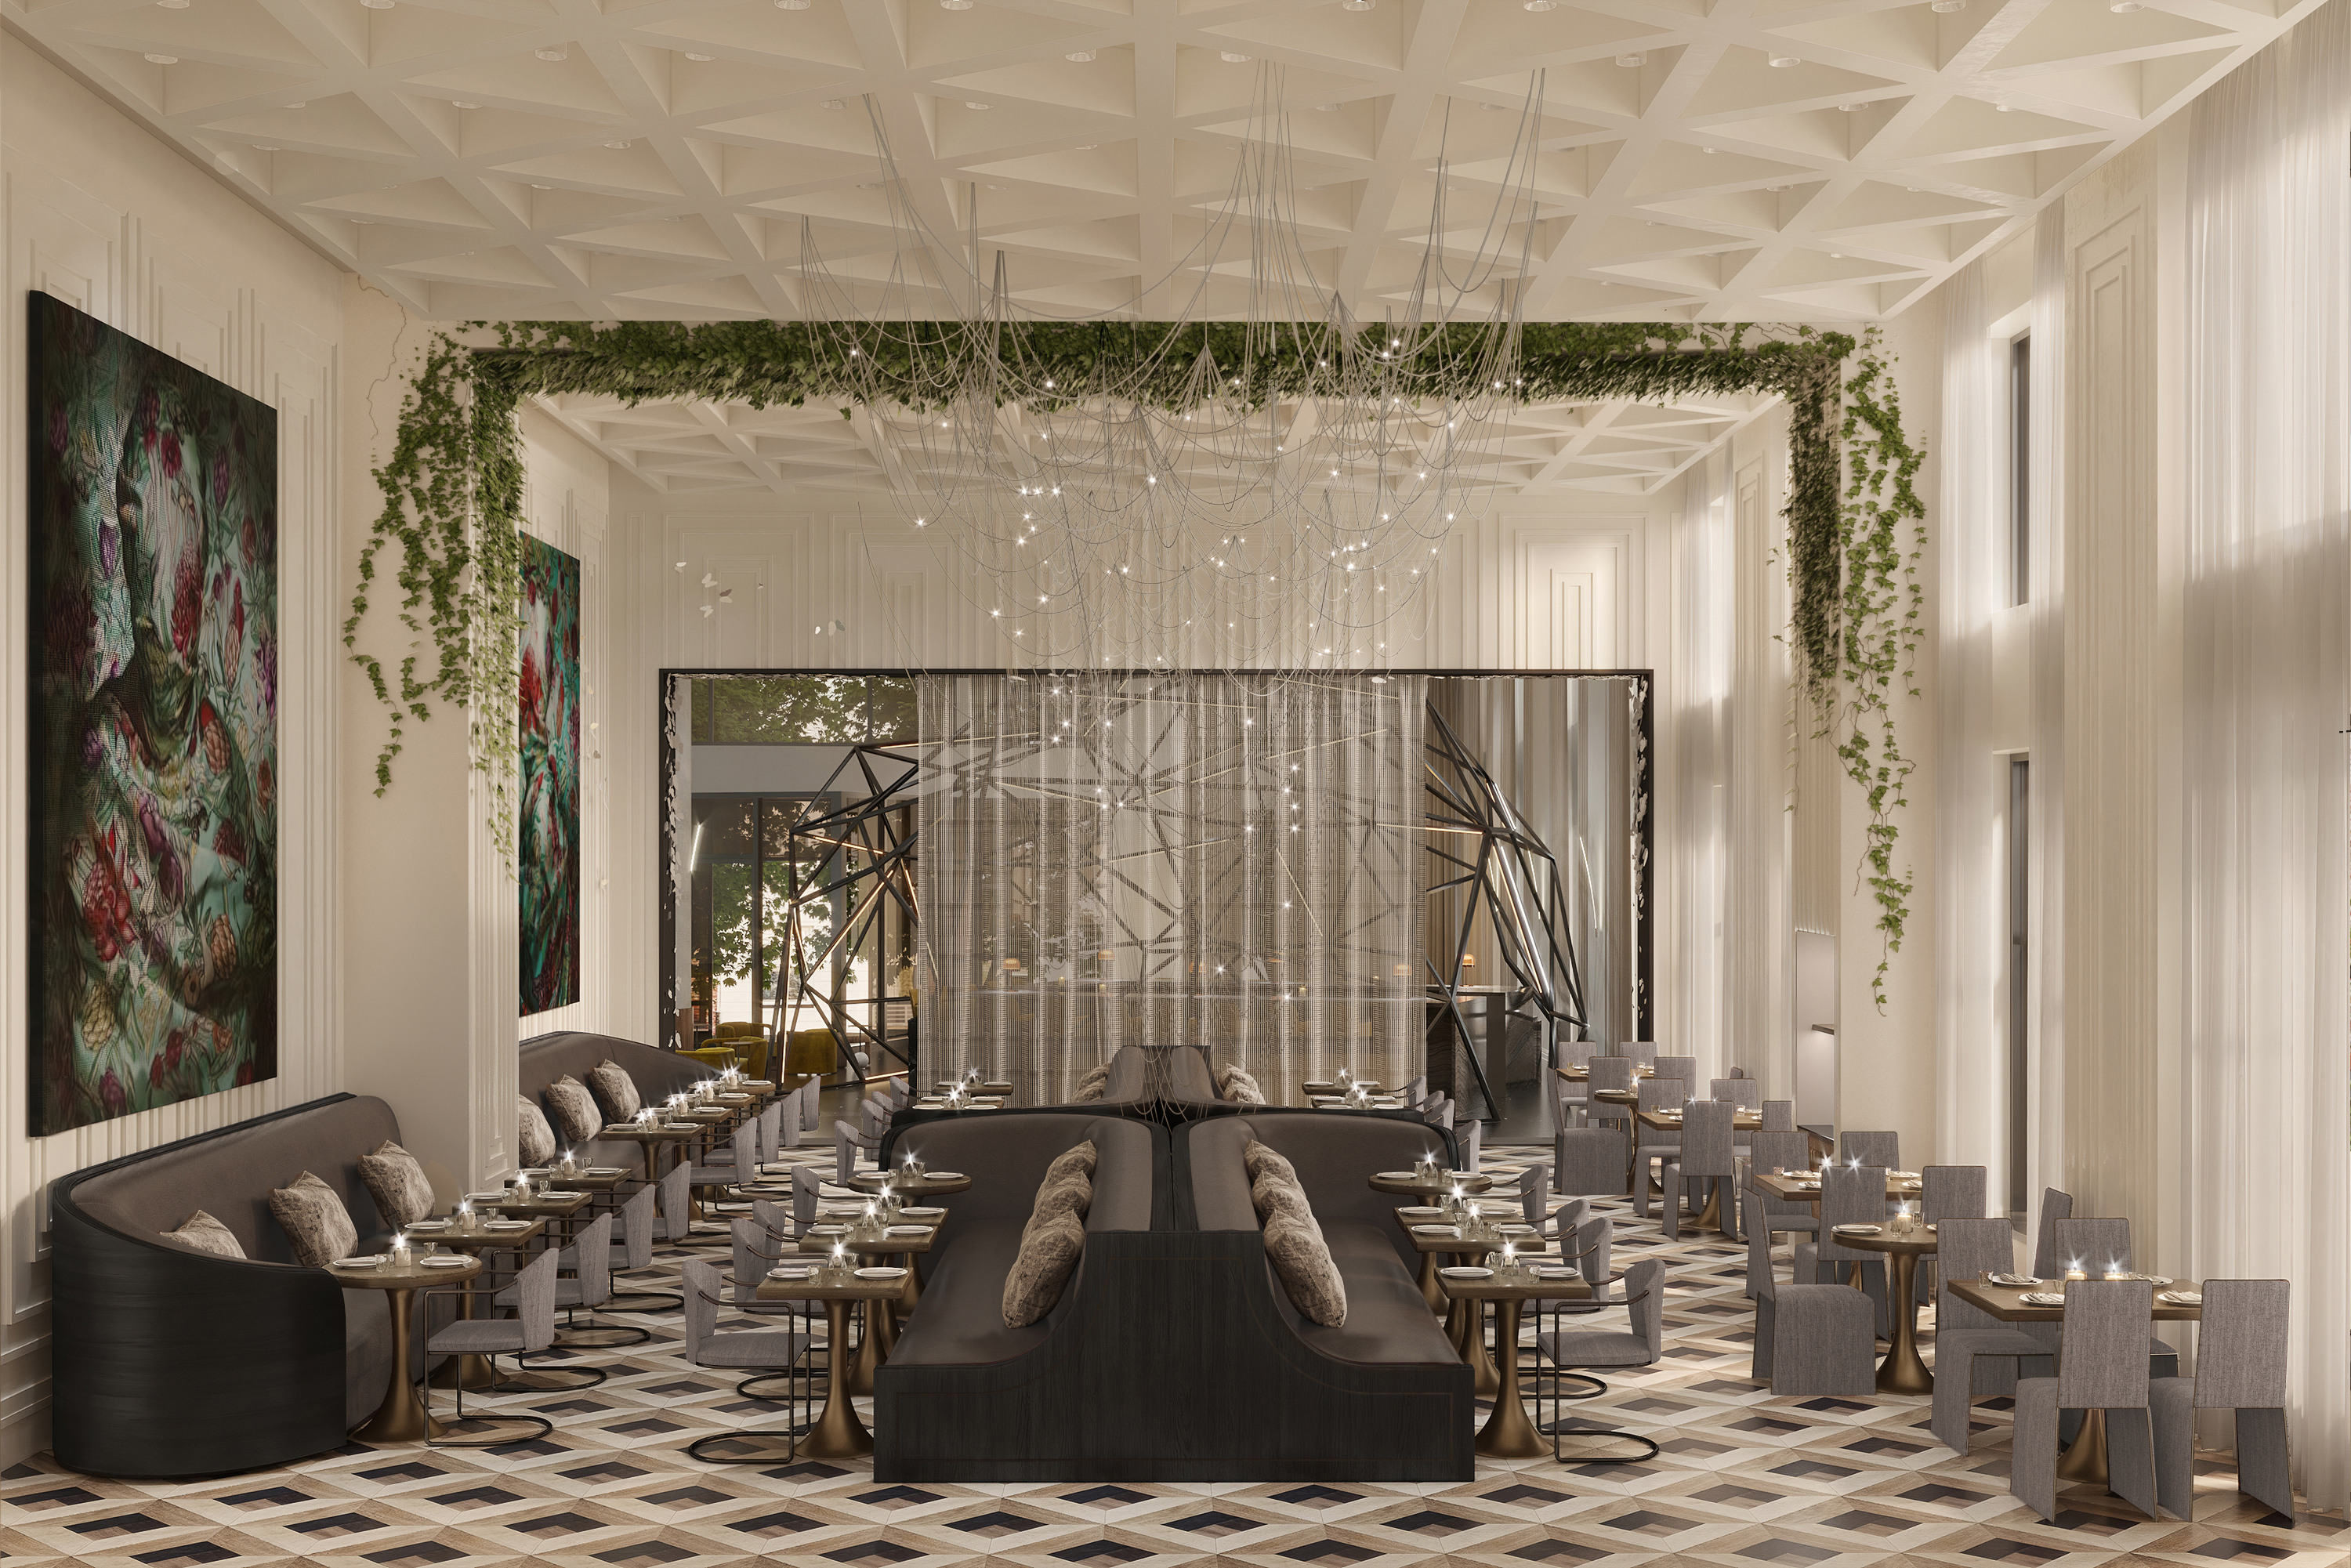 A rendering of Madam at the Daxton Hotel features long plants hanging across the ceiling next to a large window.